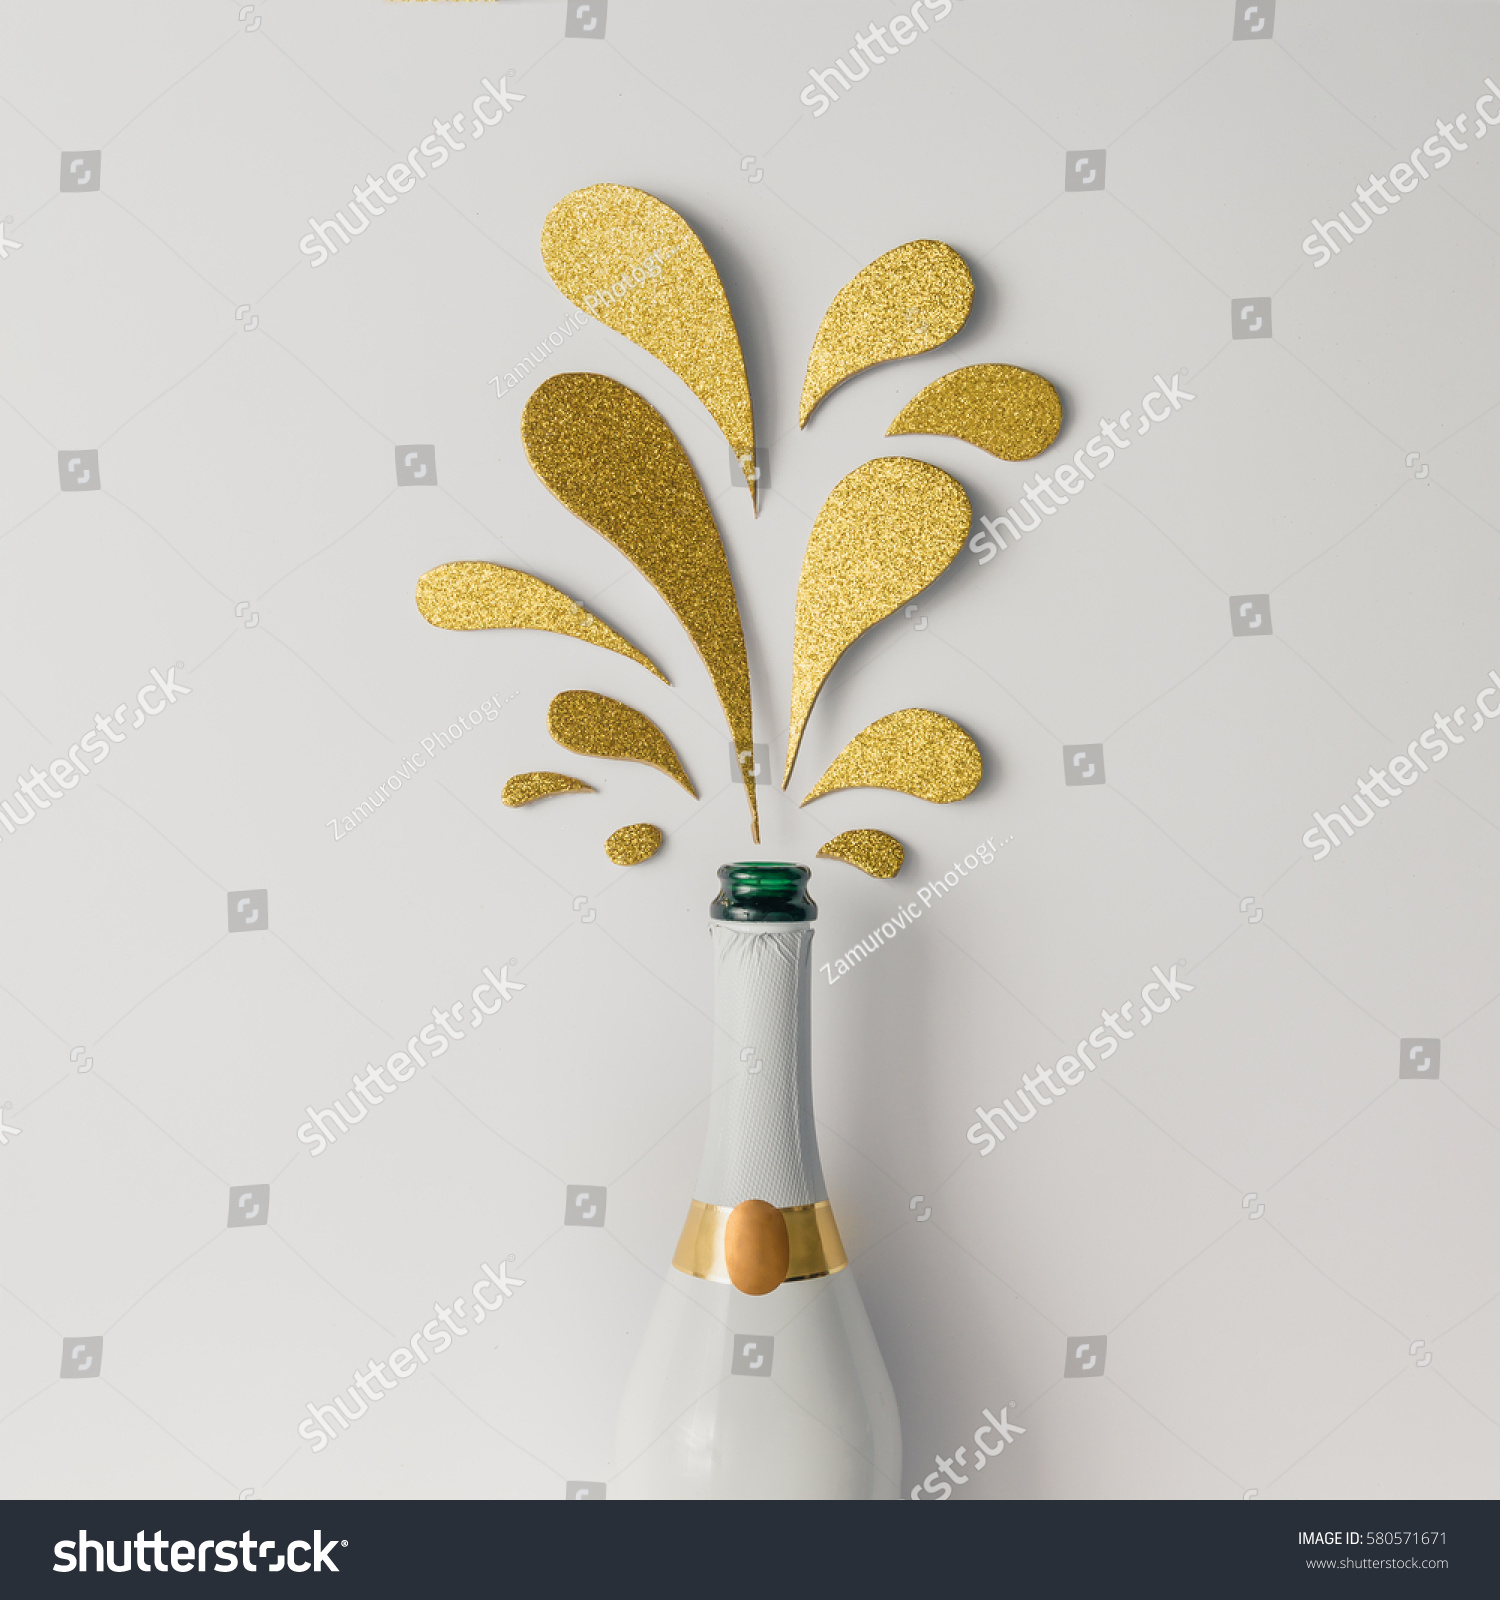 Champagne bottle with golden glittering splashes on white background. Flat lay. Minimal party concept. #580571671